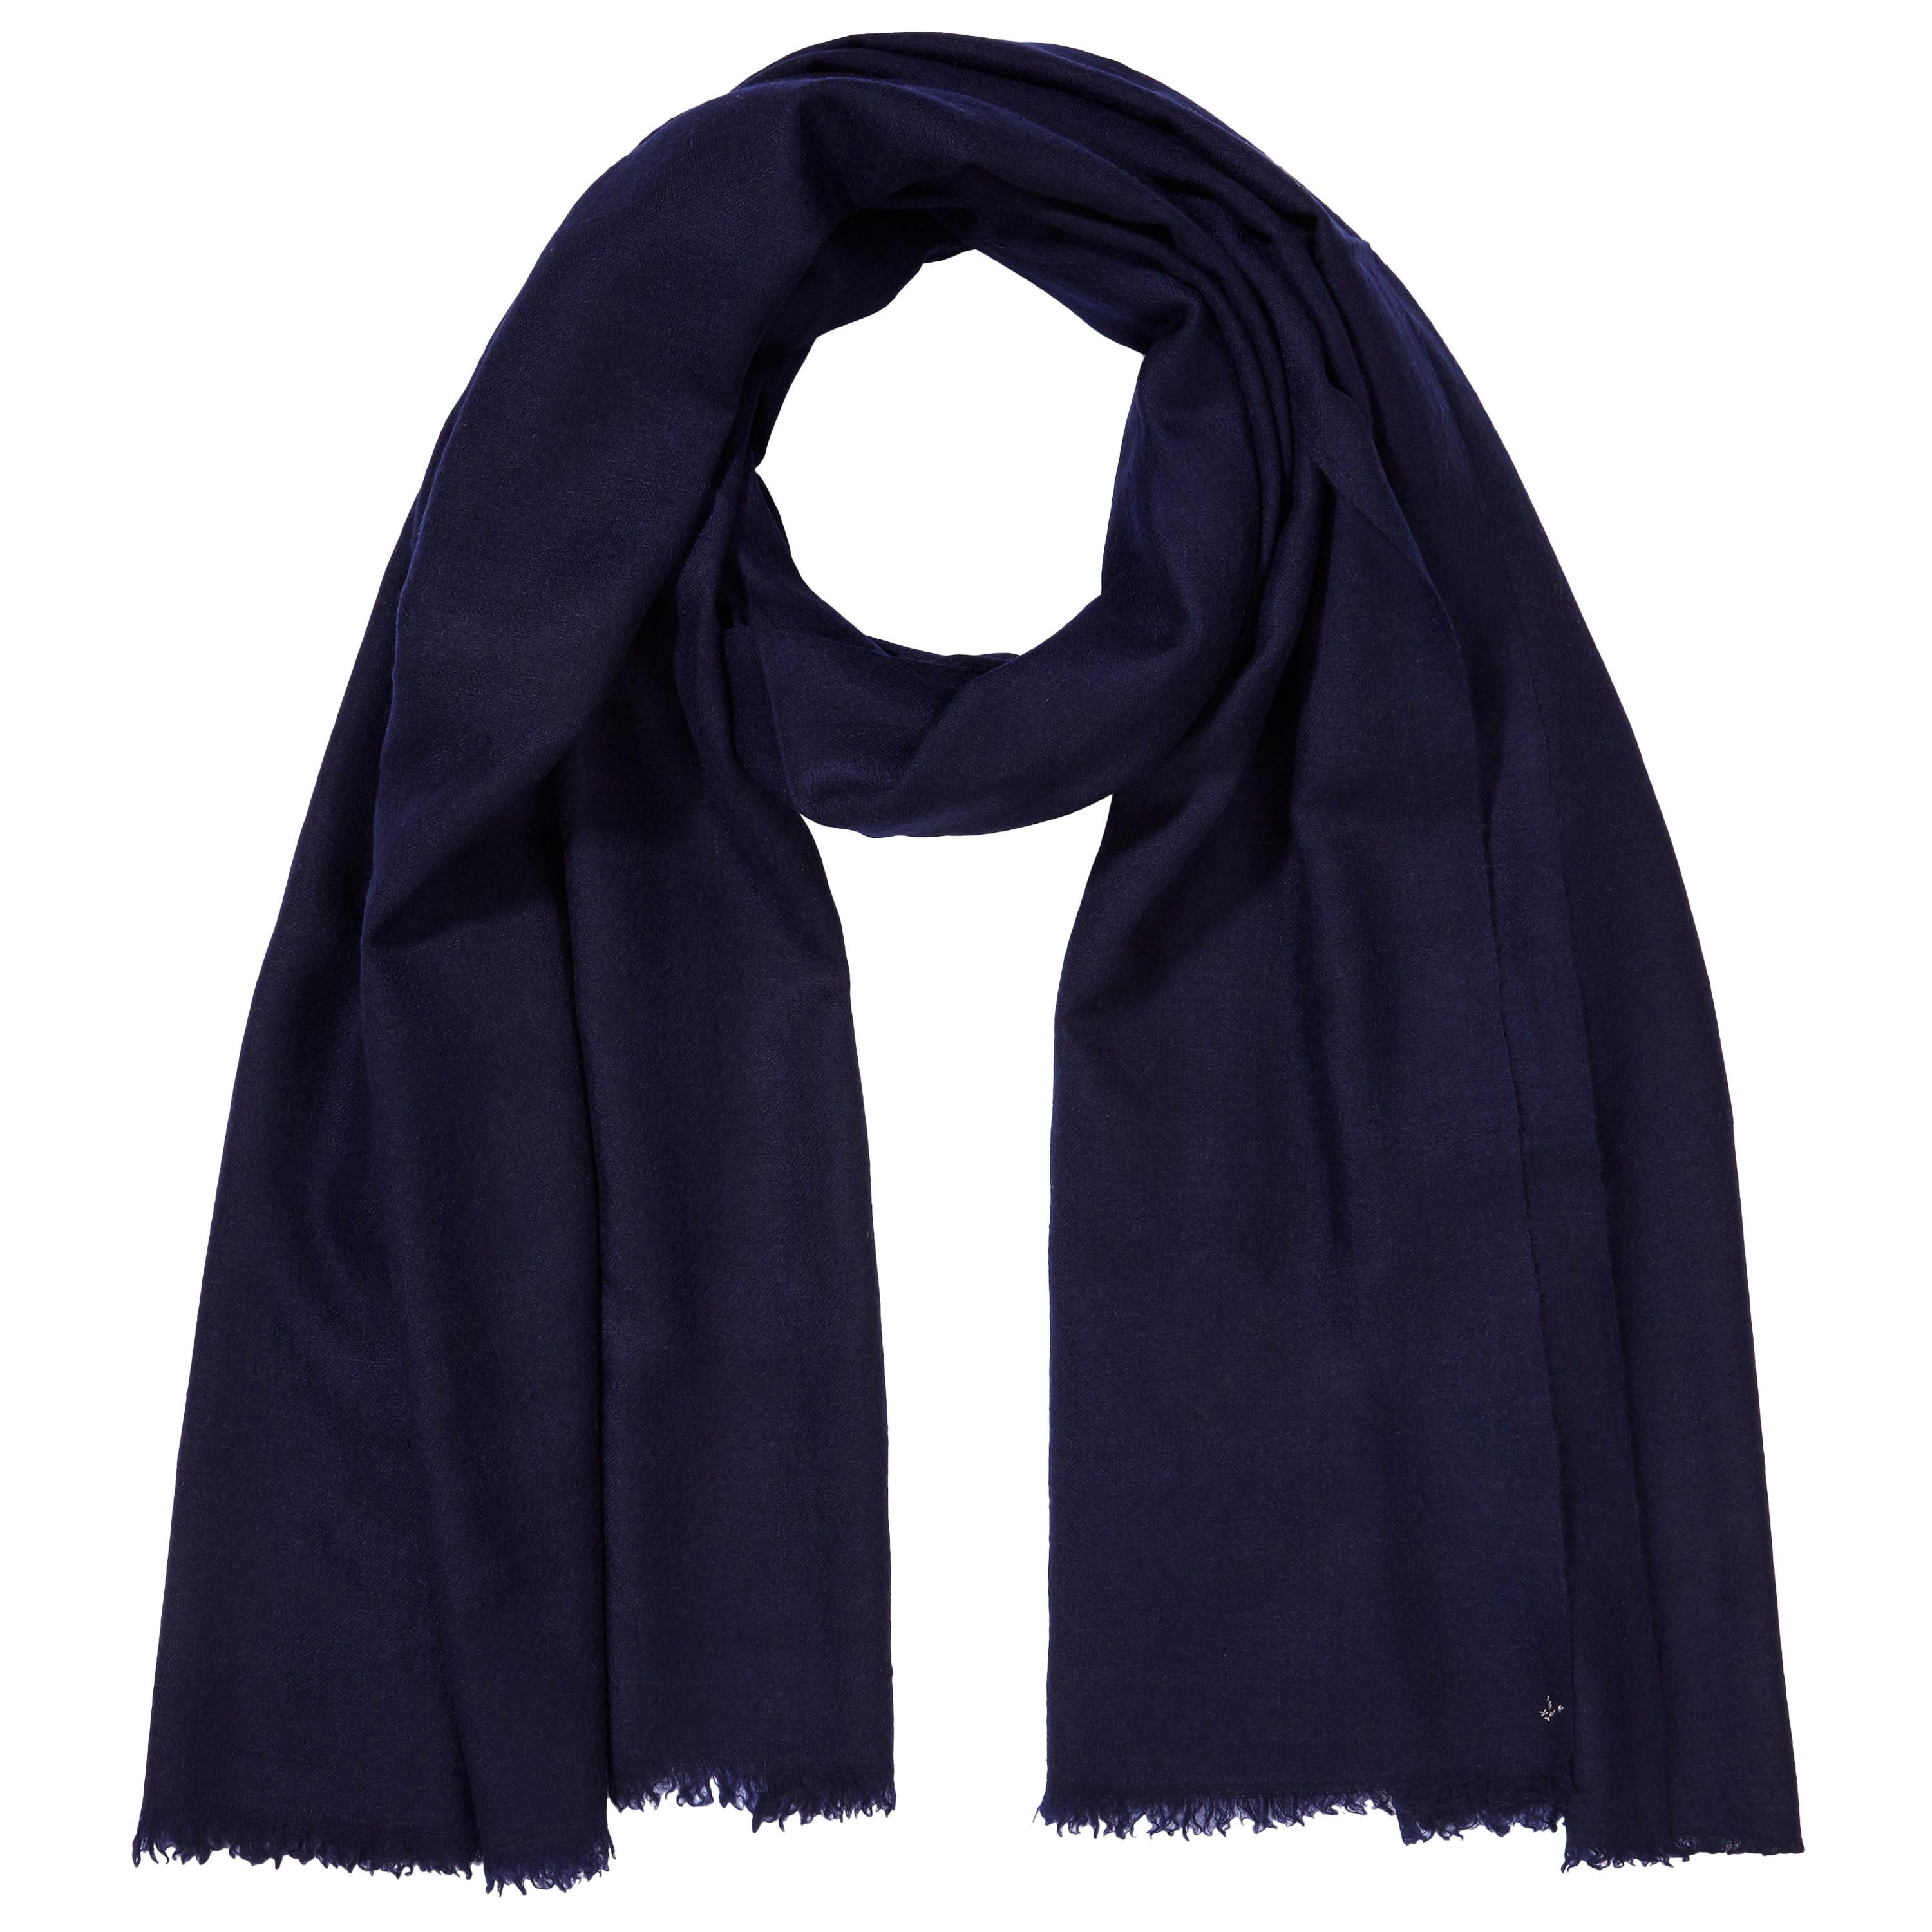 Large Handwoven 100% Cashmere Scarf in Navy made in Kashmir India - Brand New 